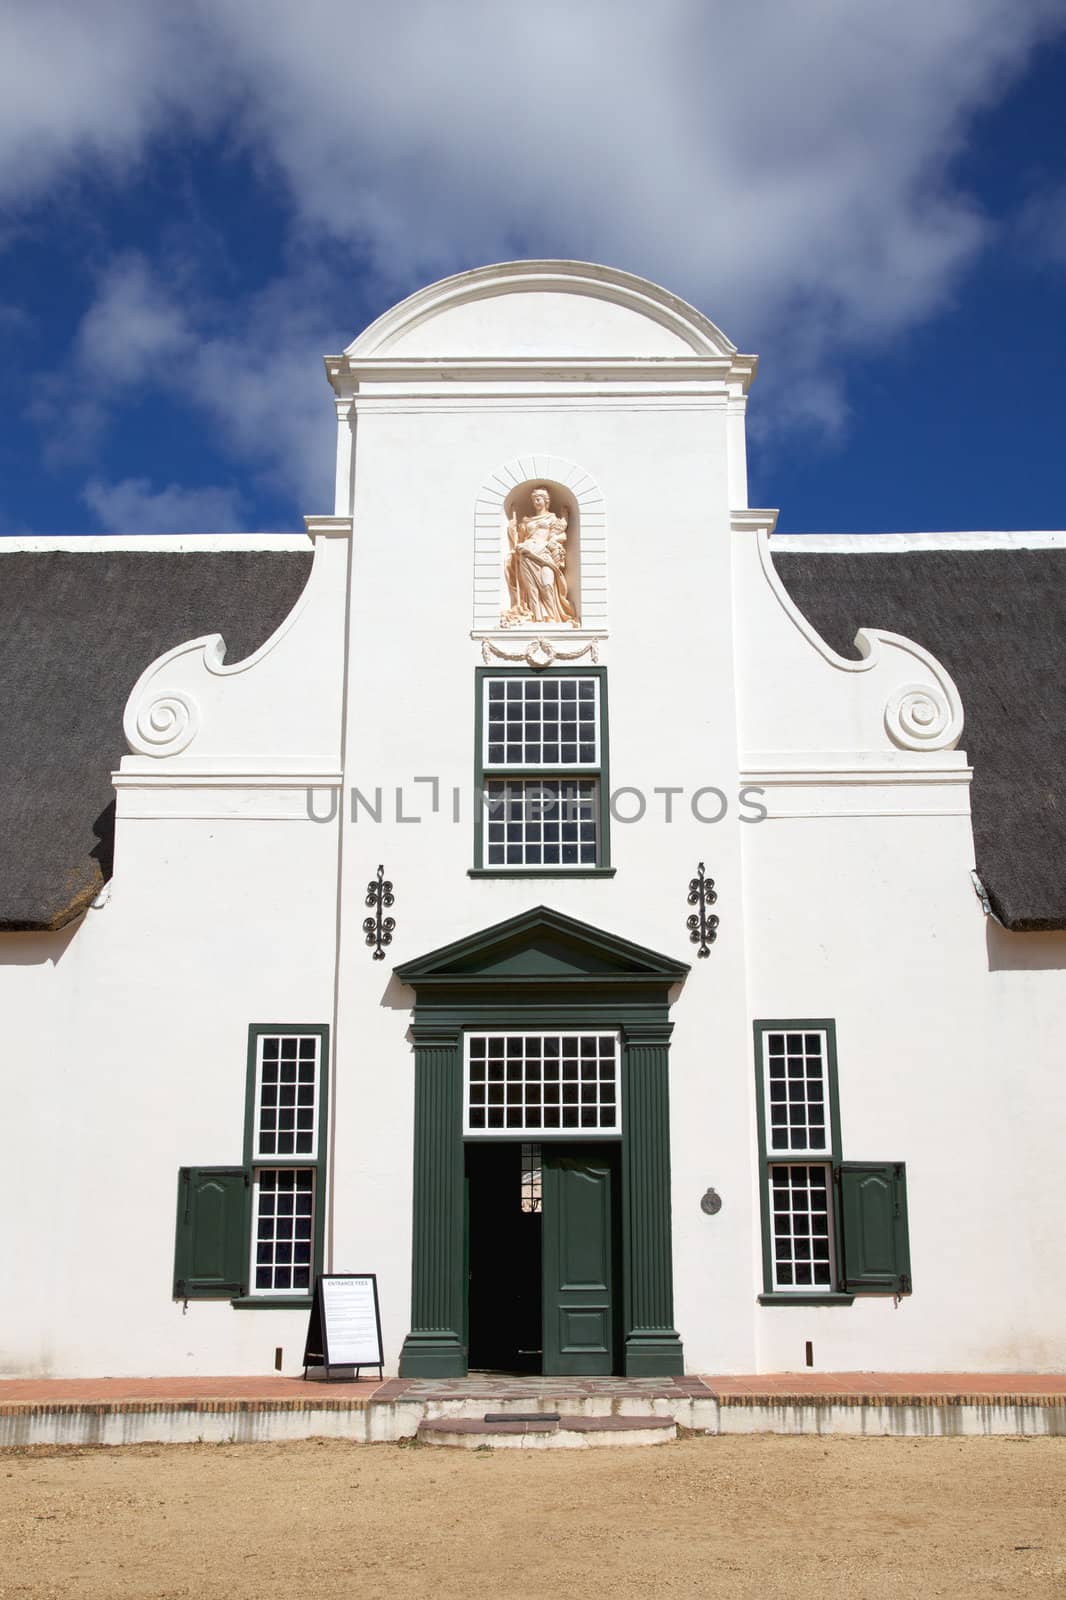 Groot Constantia, the finest surviving example of Cape Dutch architecture and one of South Africa’s foremost historical monuments and tourist attractions.